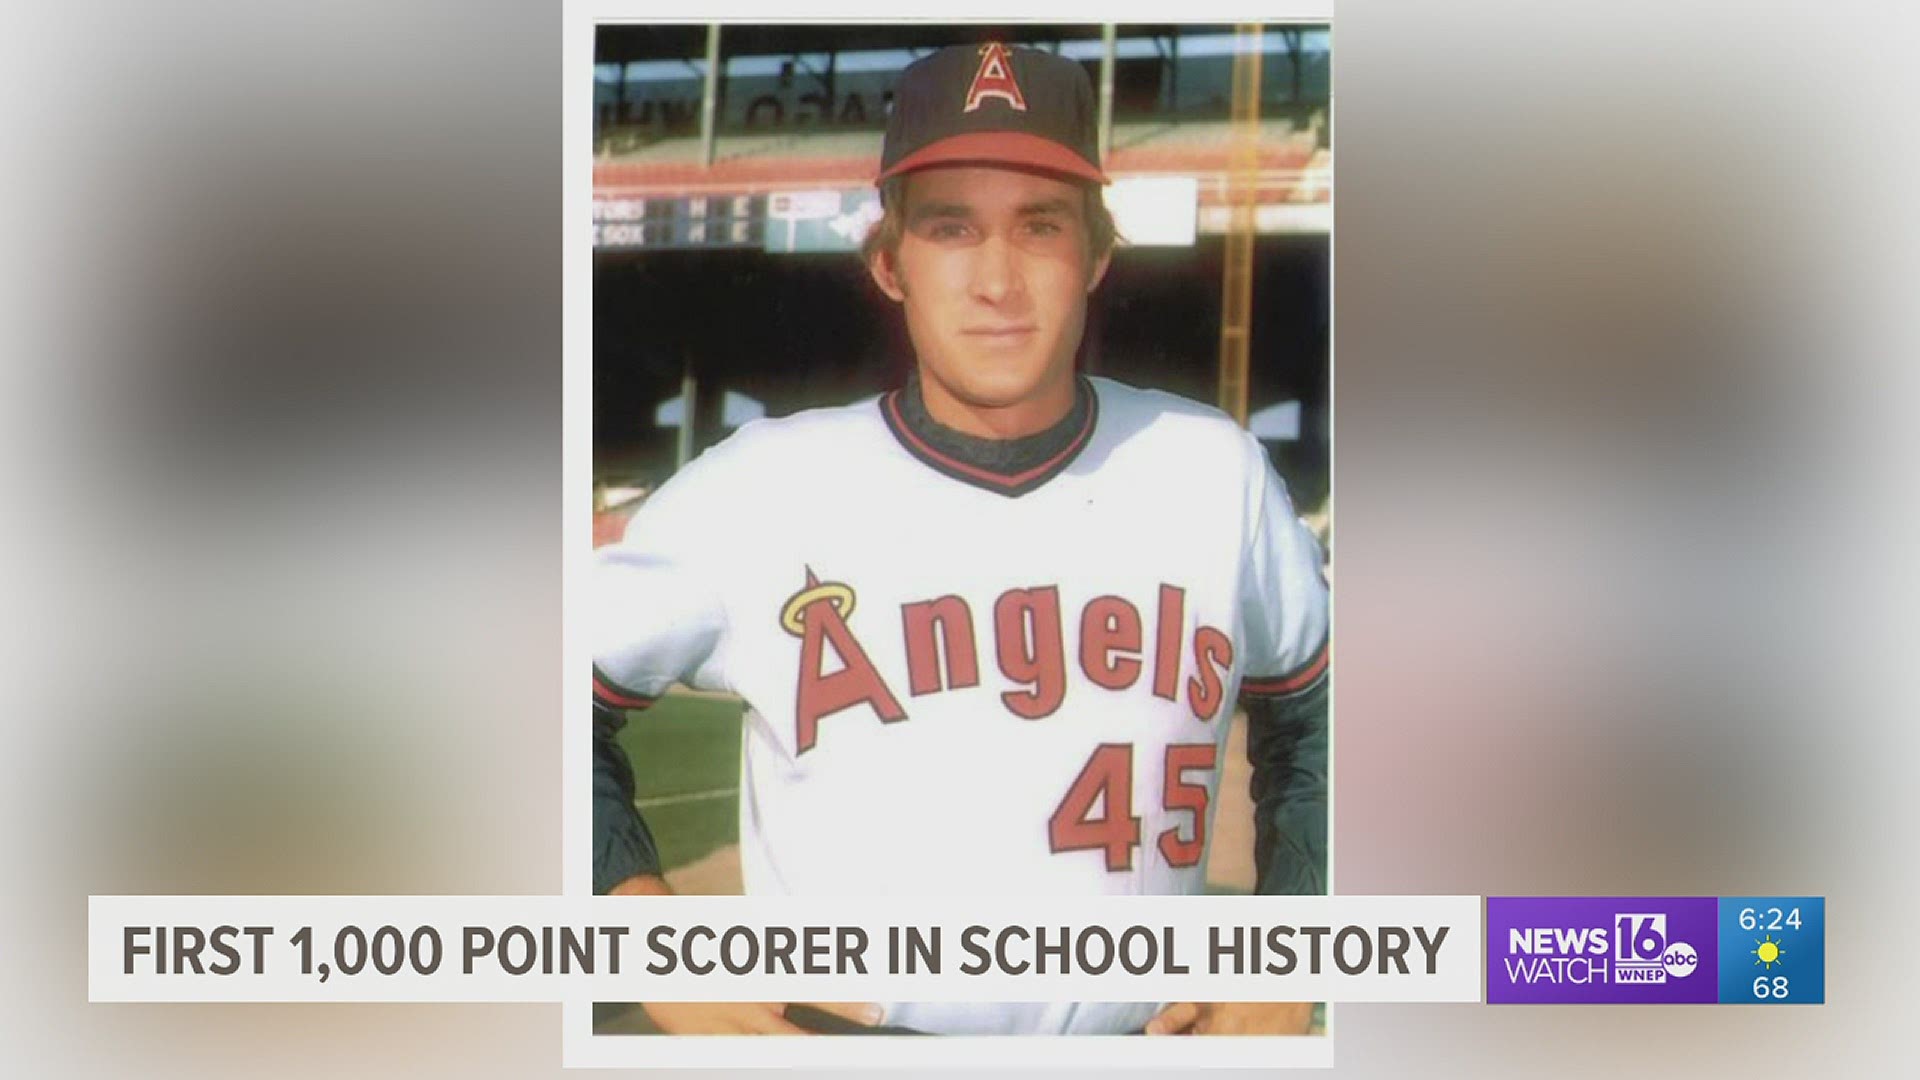 California Angels pitcher Paul Hartzell from Central Columbia high-school  listed as the 91st best player all-time in franchise history